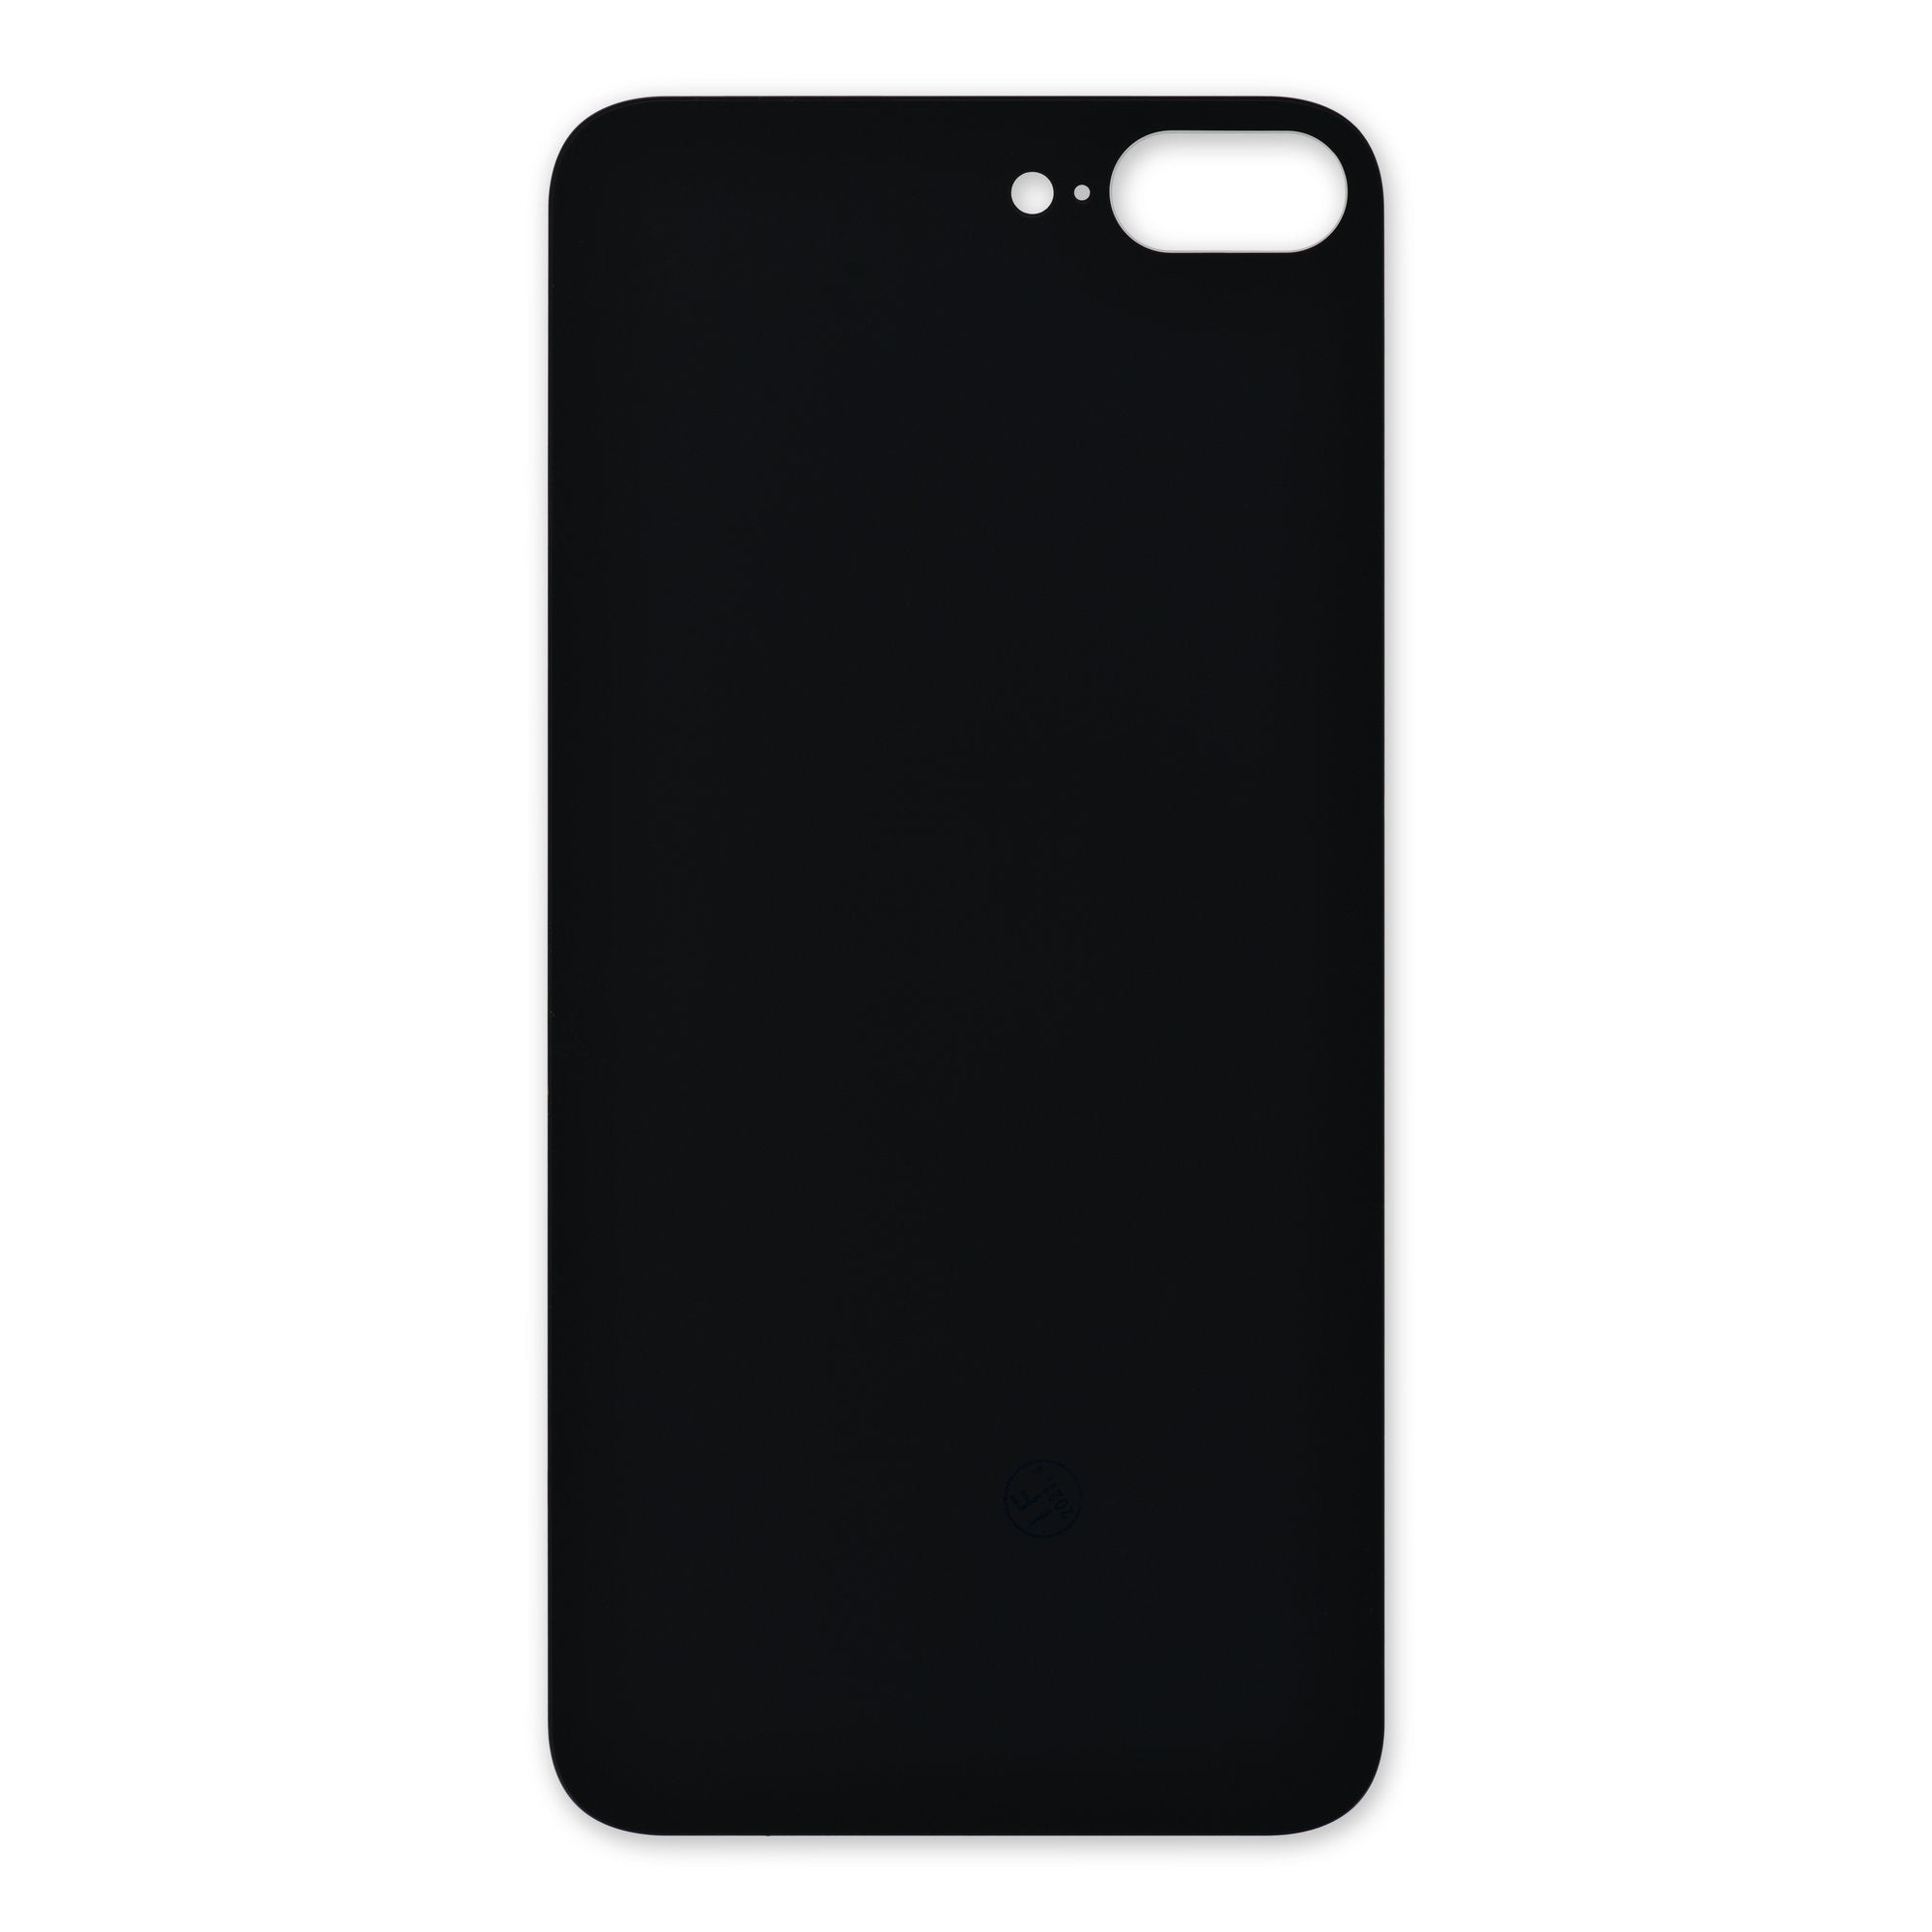 iPhone 8 Plus Aftermarket Blank Rear Glass Panel Black New